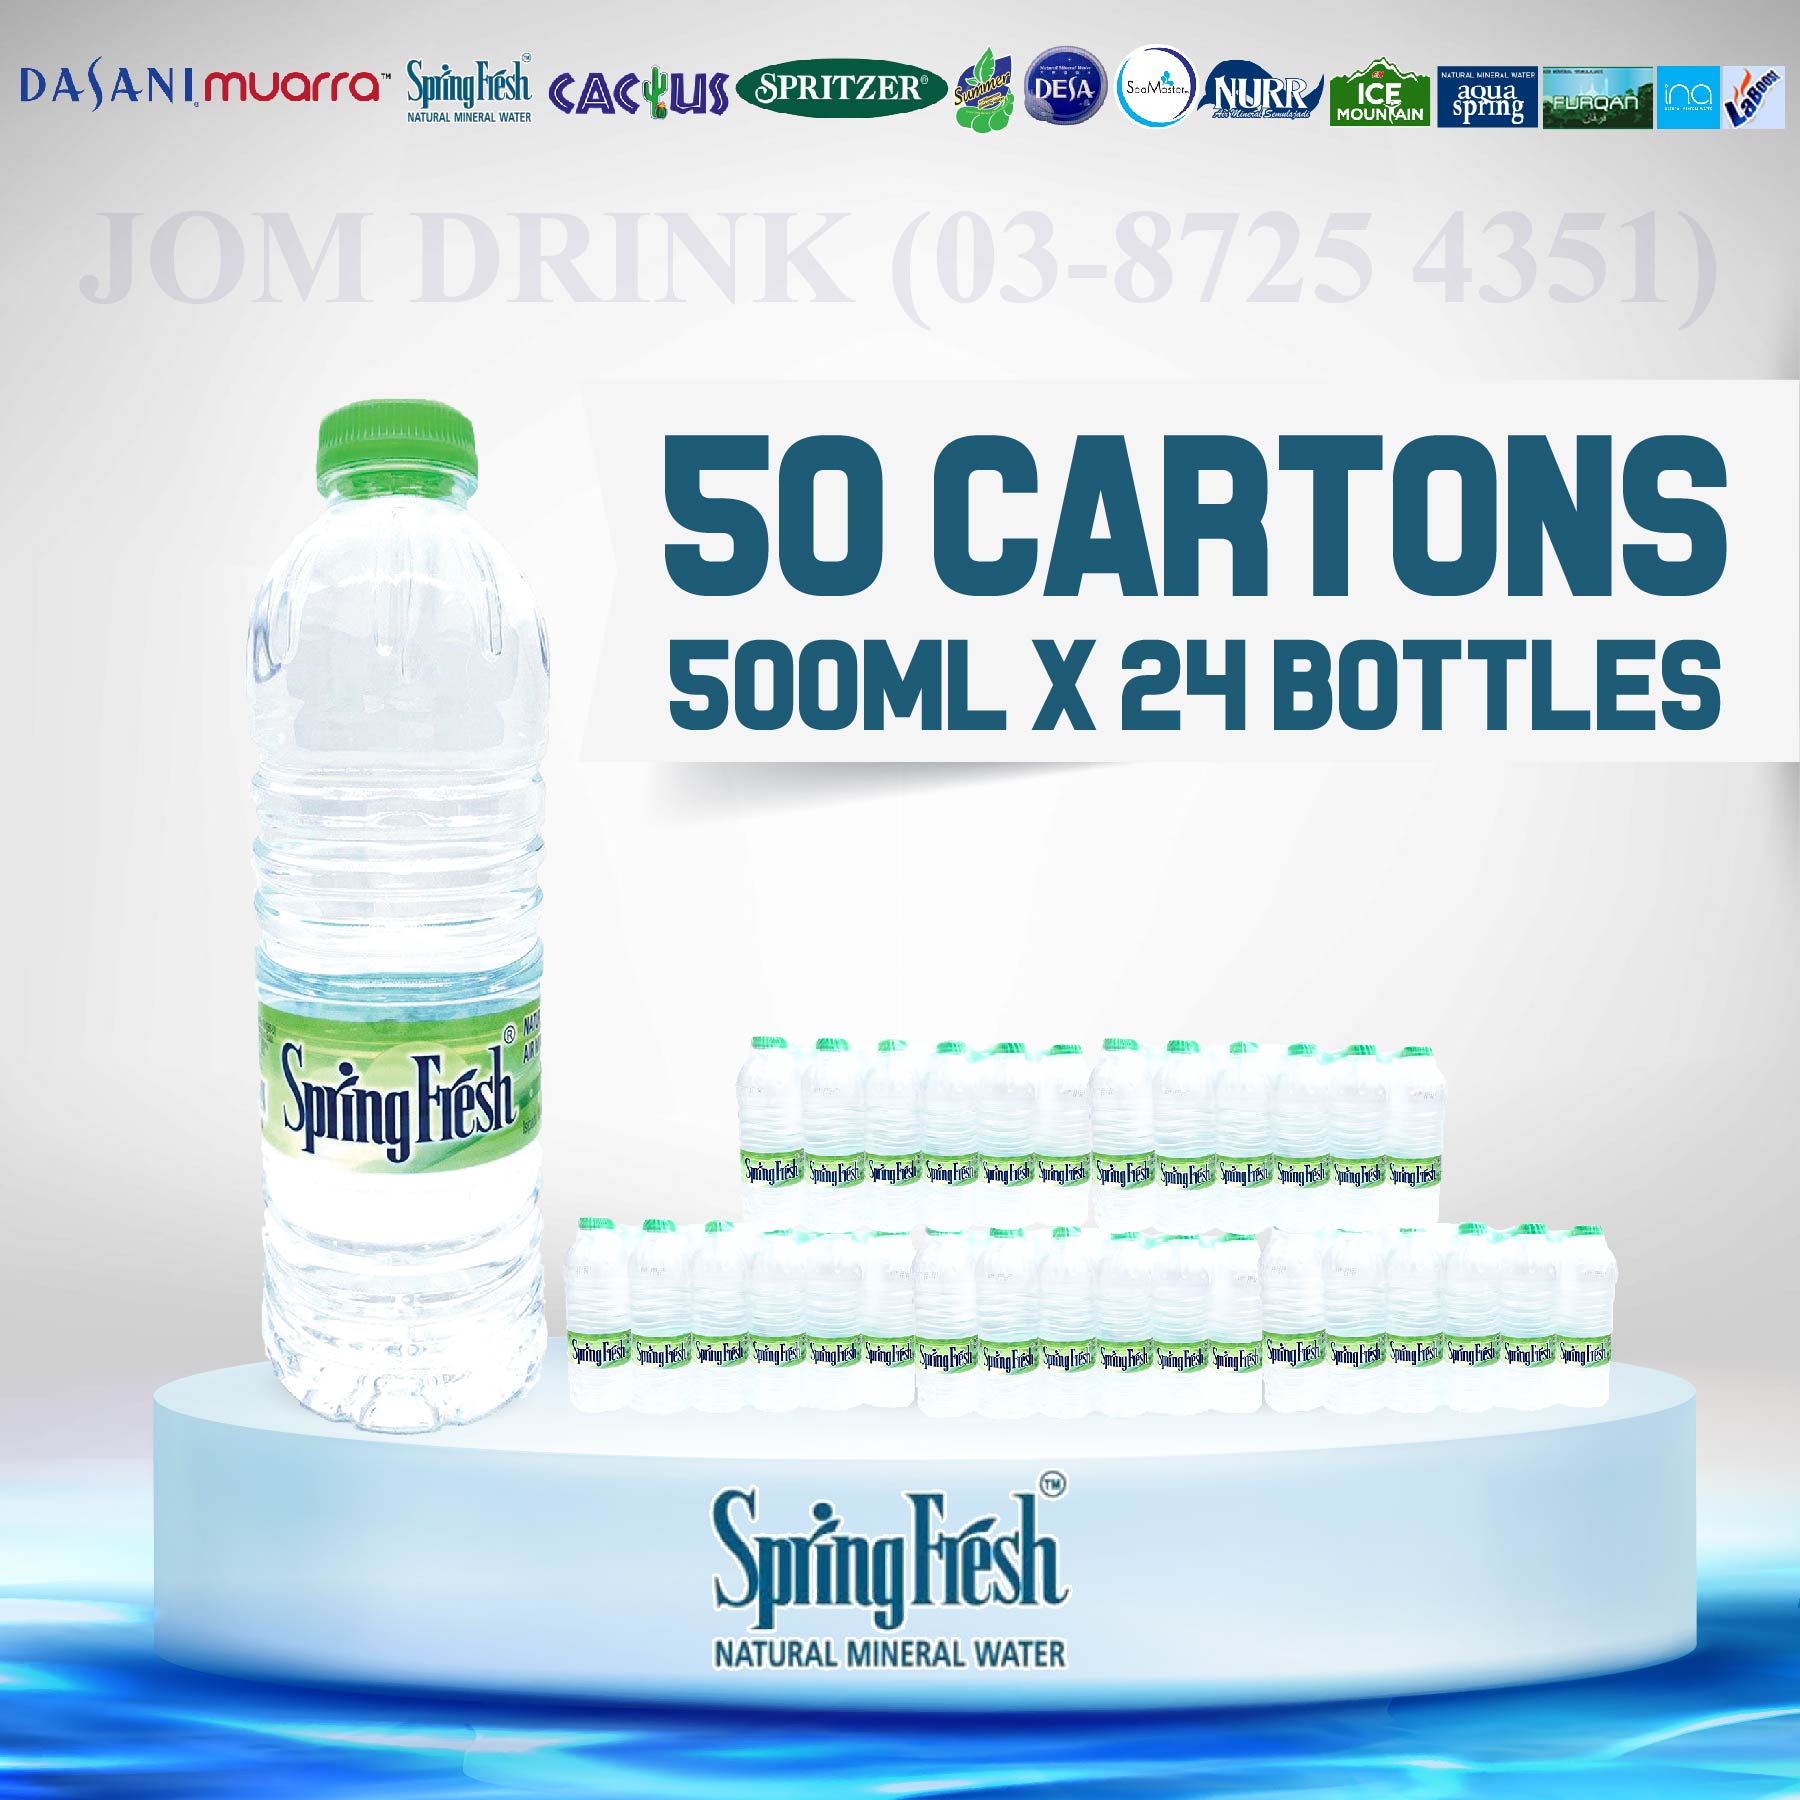 PACKAGES OF 50 BOXES : SPRINGFRESH MINERAL WATER 500ML